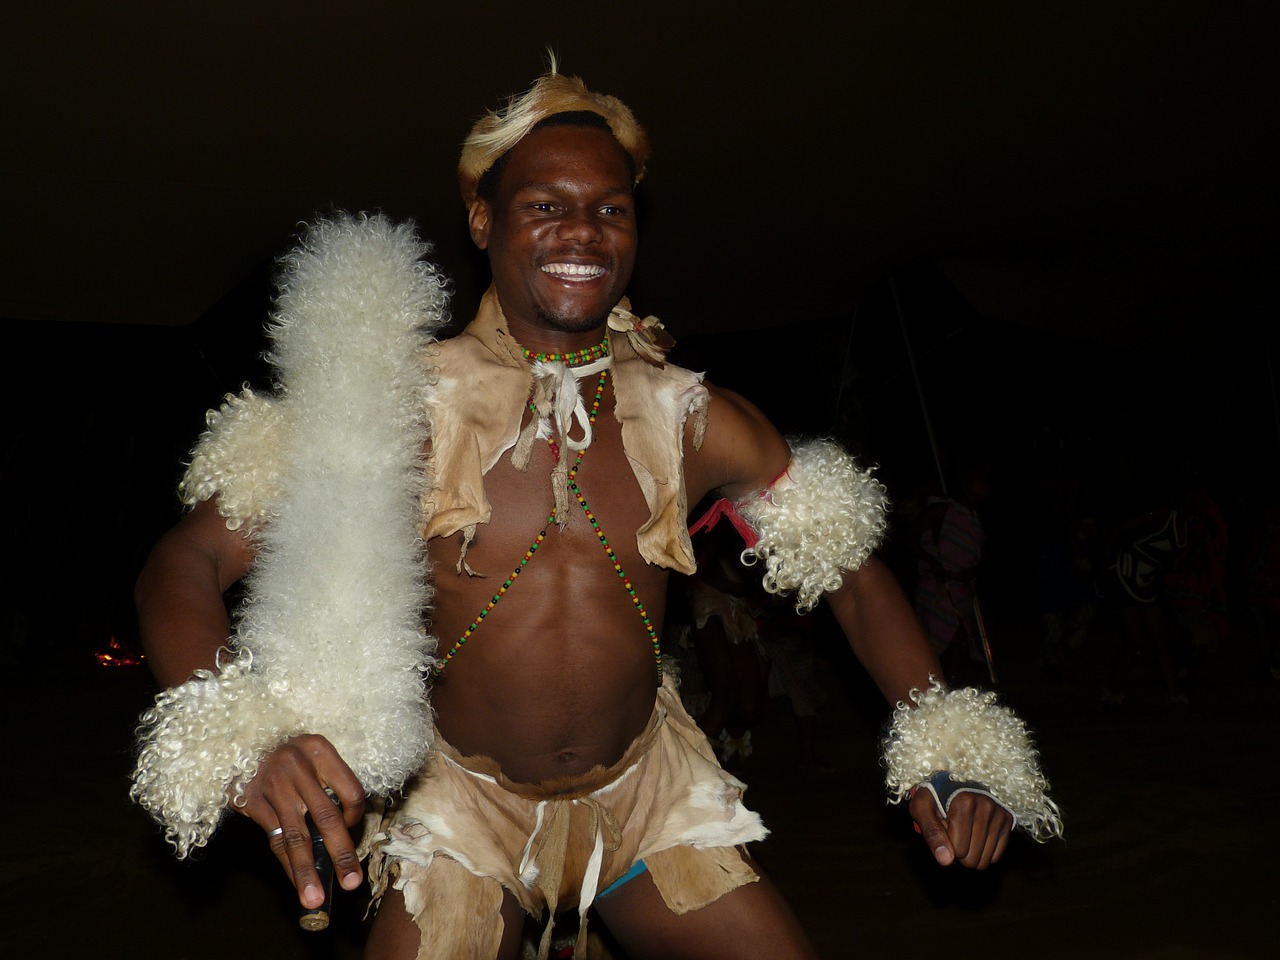 south africa dance folklore free photo